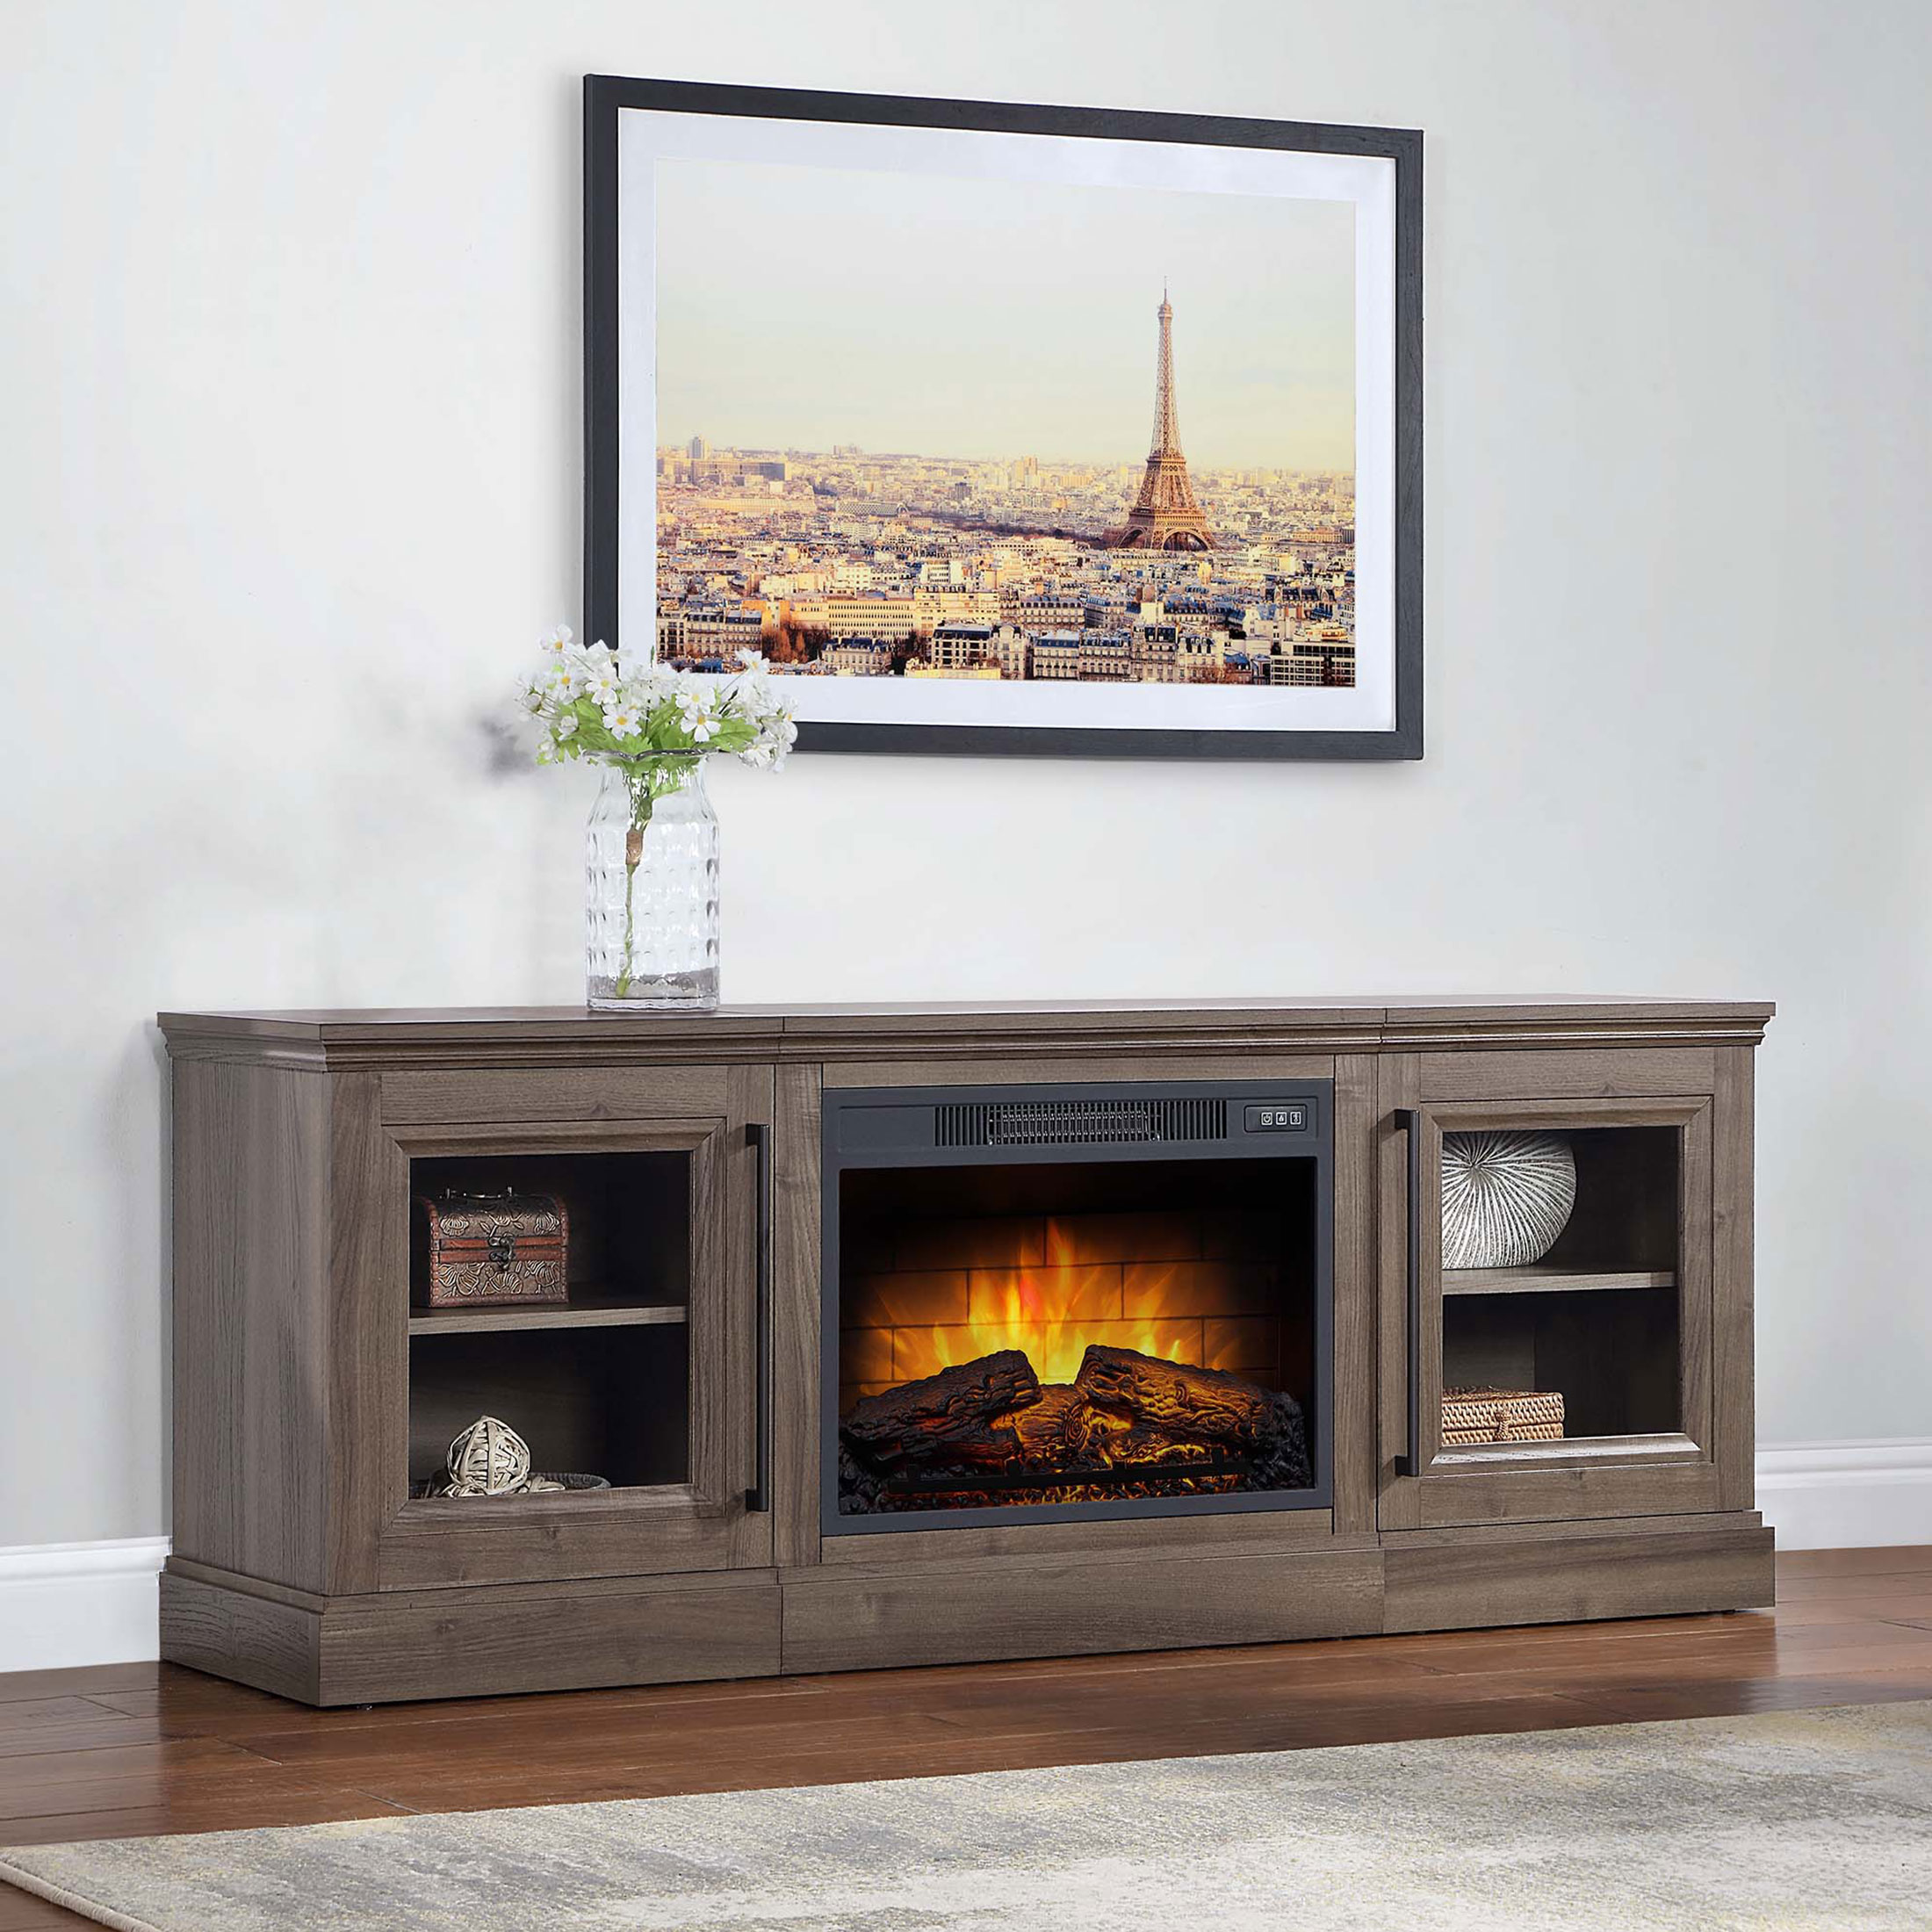 Whalen Furniture Quantum Flame Media Fireplace TV Stand for TV’s up to 75”, Walnut Brown Finish - image 2 of 12